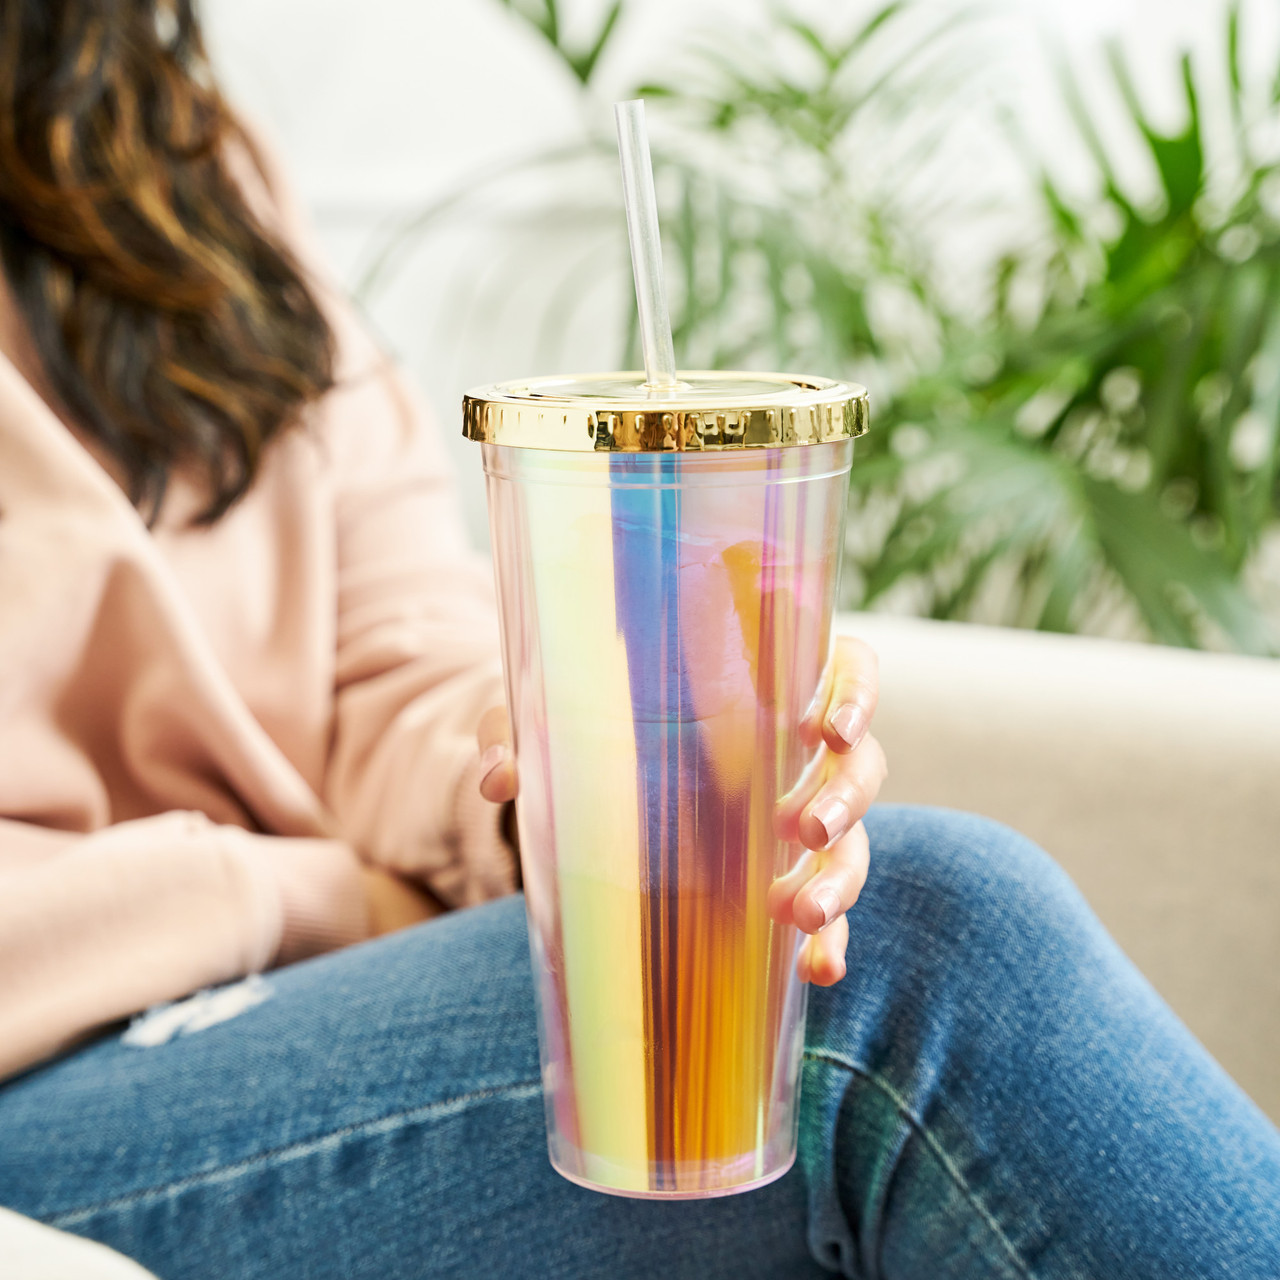 Blush Glam Double Walled Glitter Tumbler - Travel Cup & Straw 24oz, Gold 